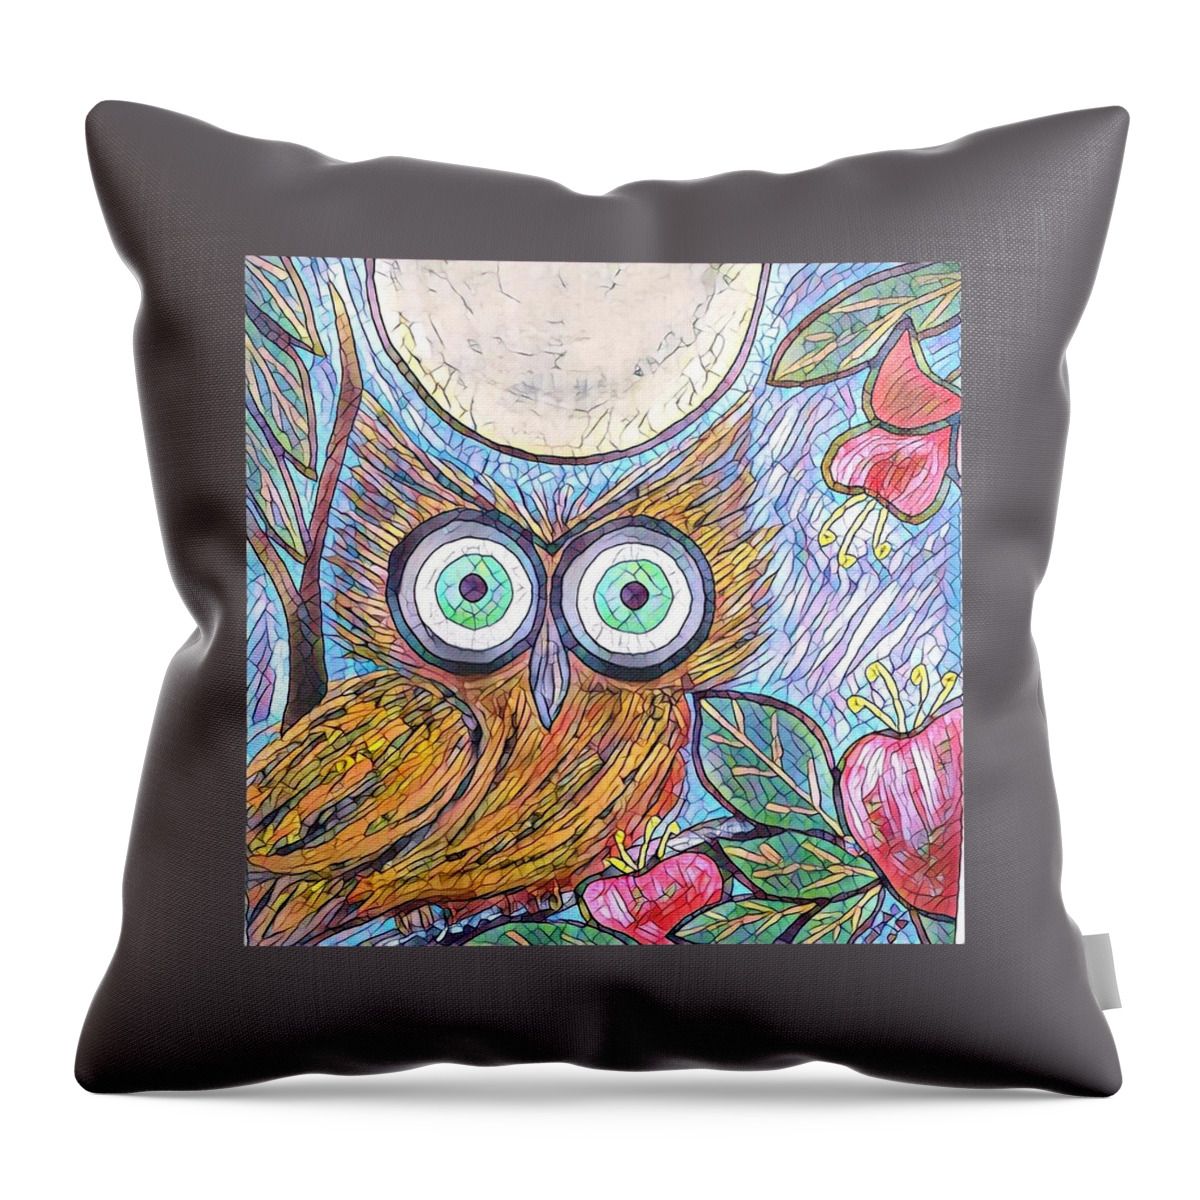  Throw Pillow featuring the digital art Owl Midnight #11 by M Sullivan Image and Design